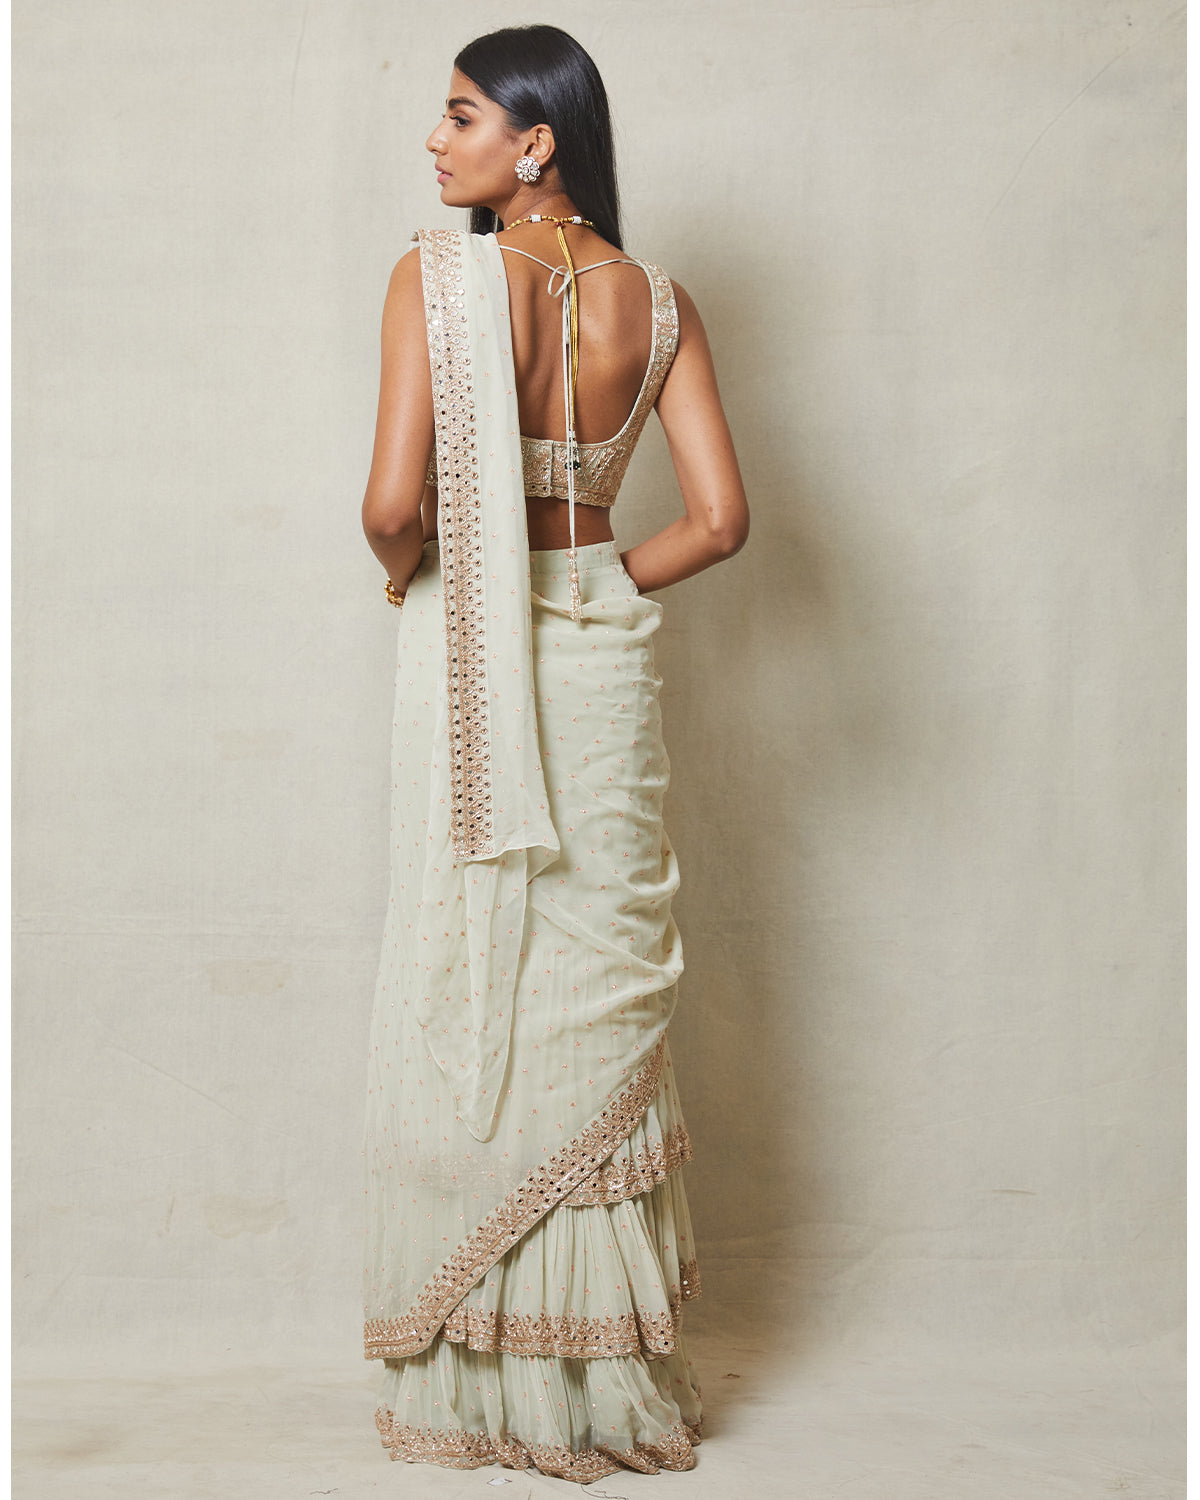 Mother of Pearl and Rose Gold Ruffle Sari | Sample Sale